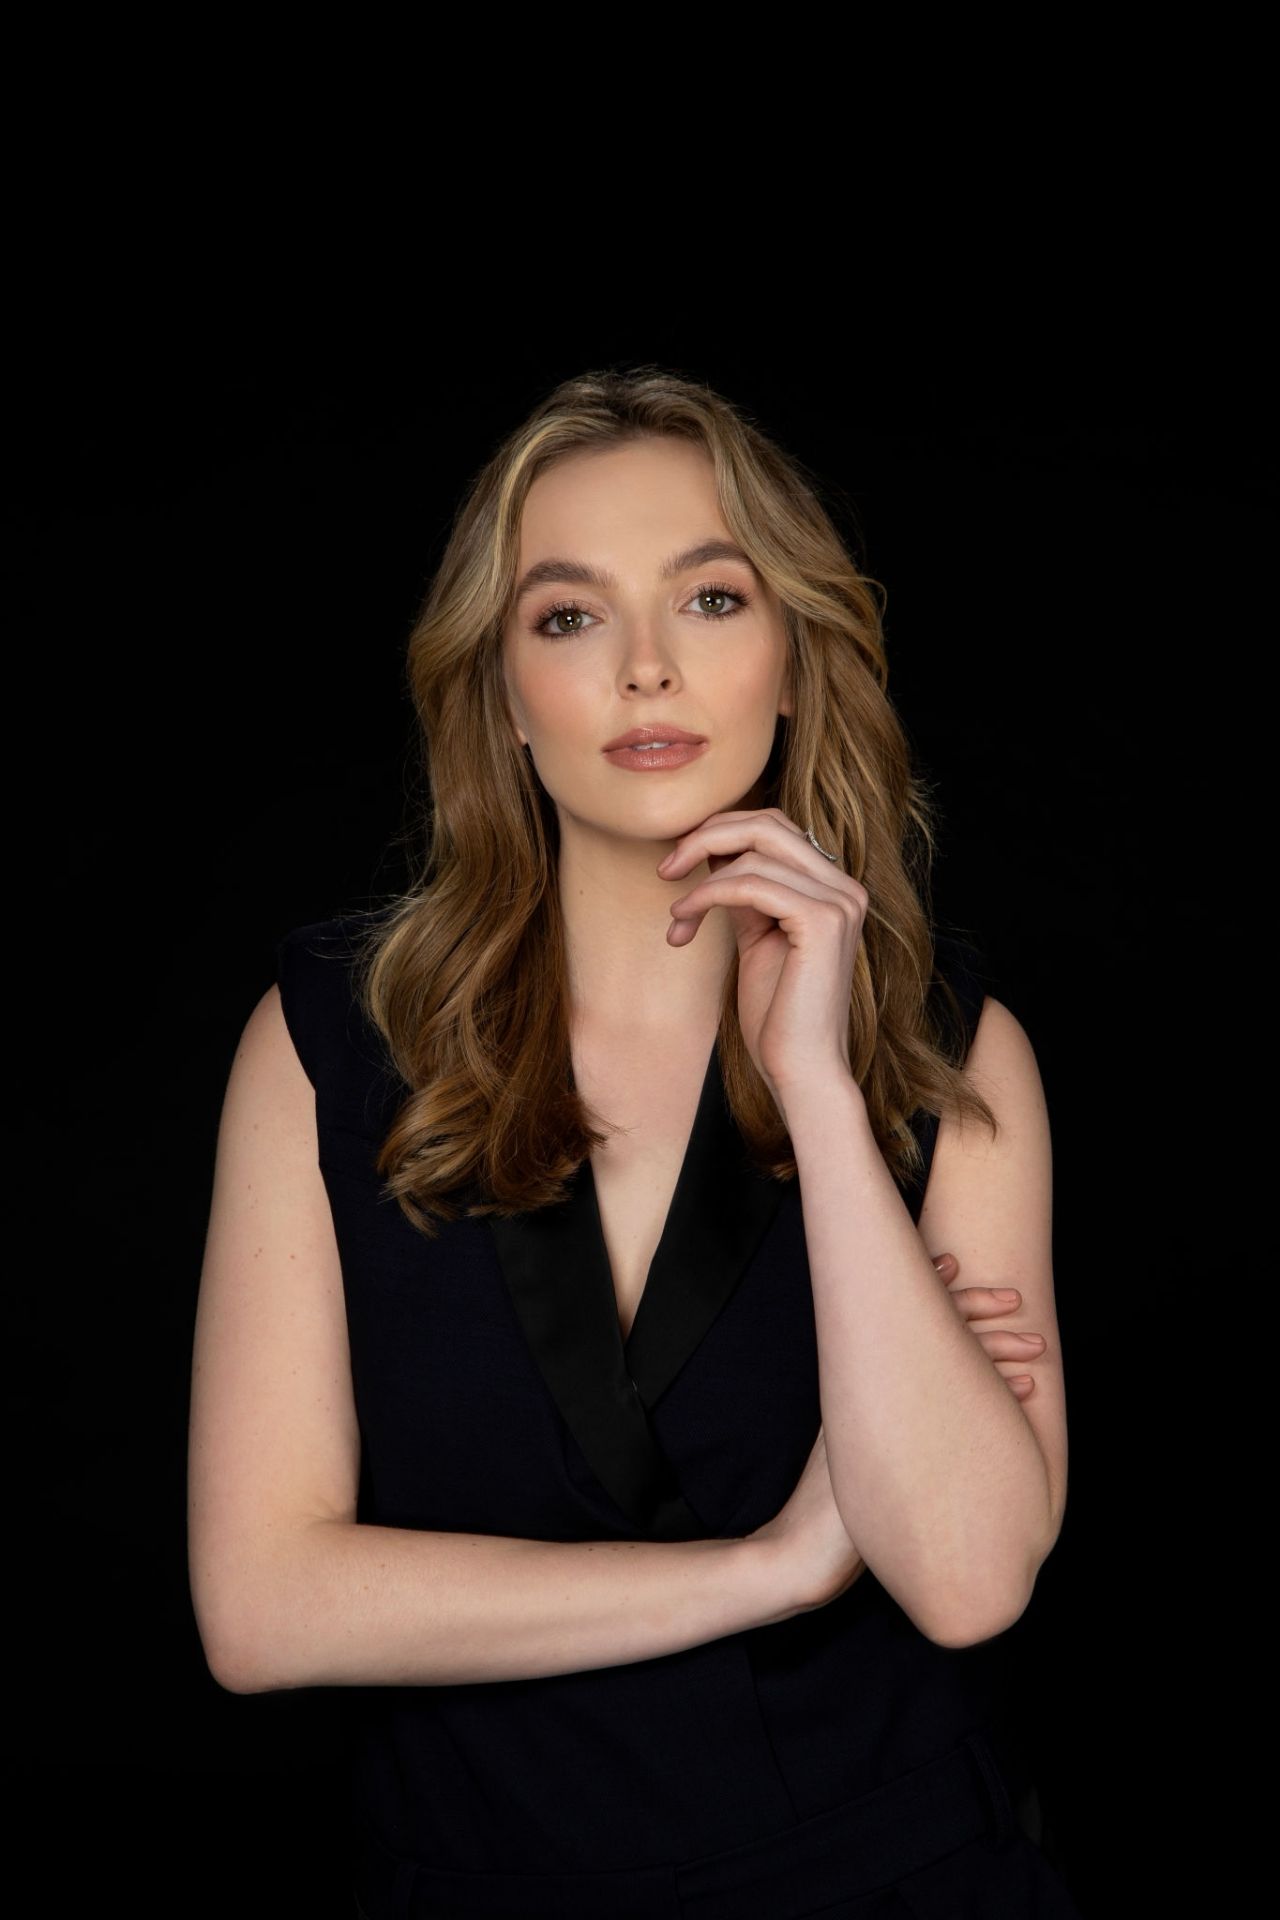 jodie-comer-photoshoot-for-la-times-june-2019-3.jpg